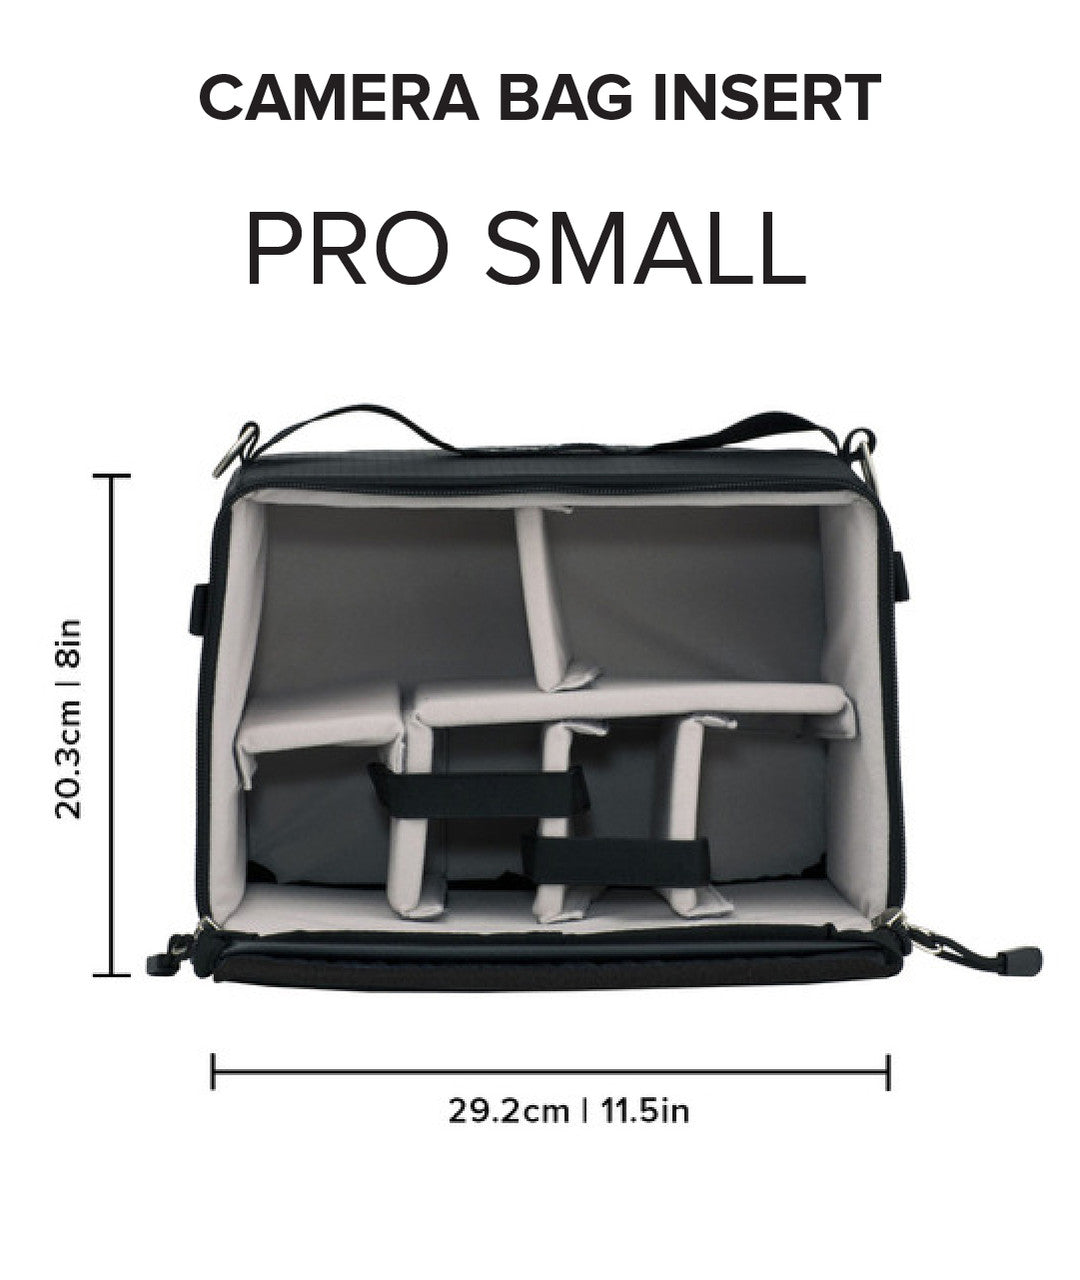 ICU - Pro Small Camera Bag Insert and Cube